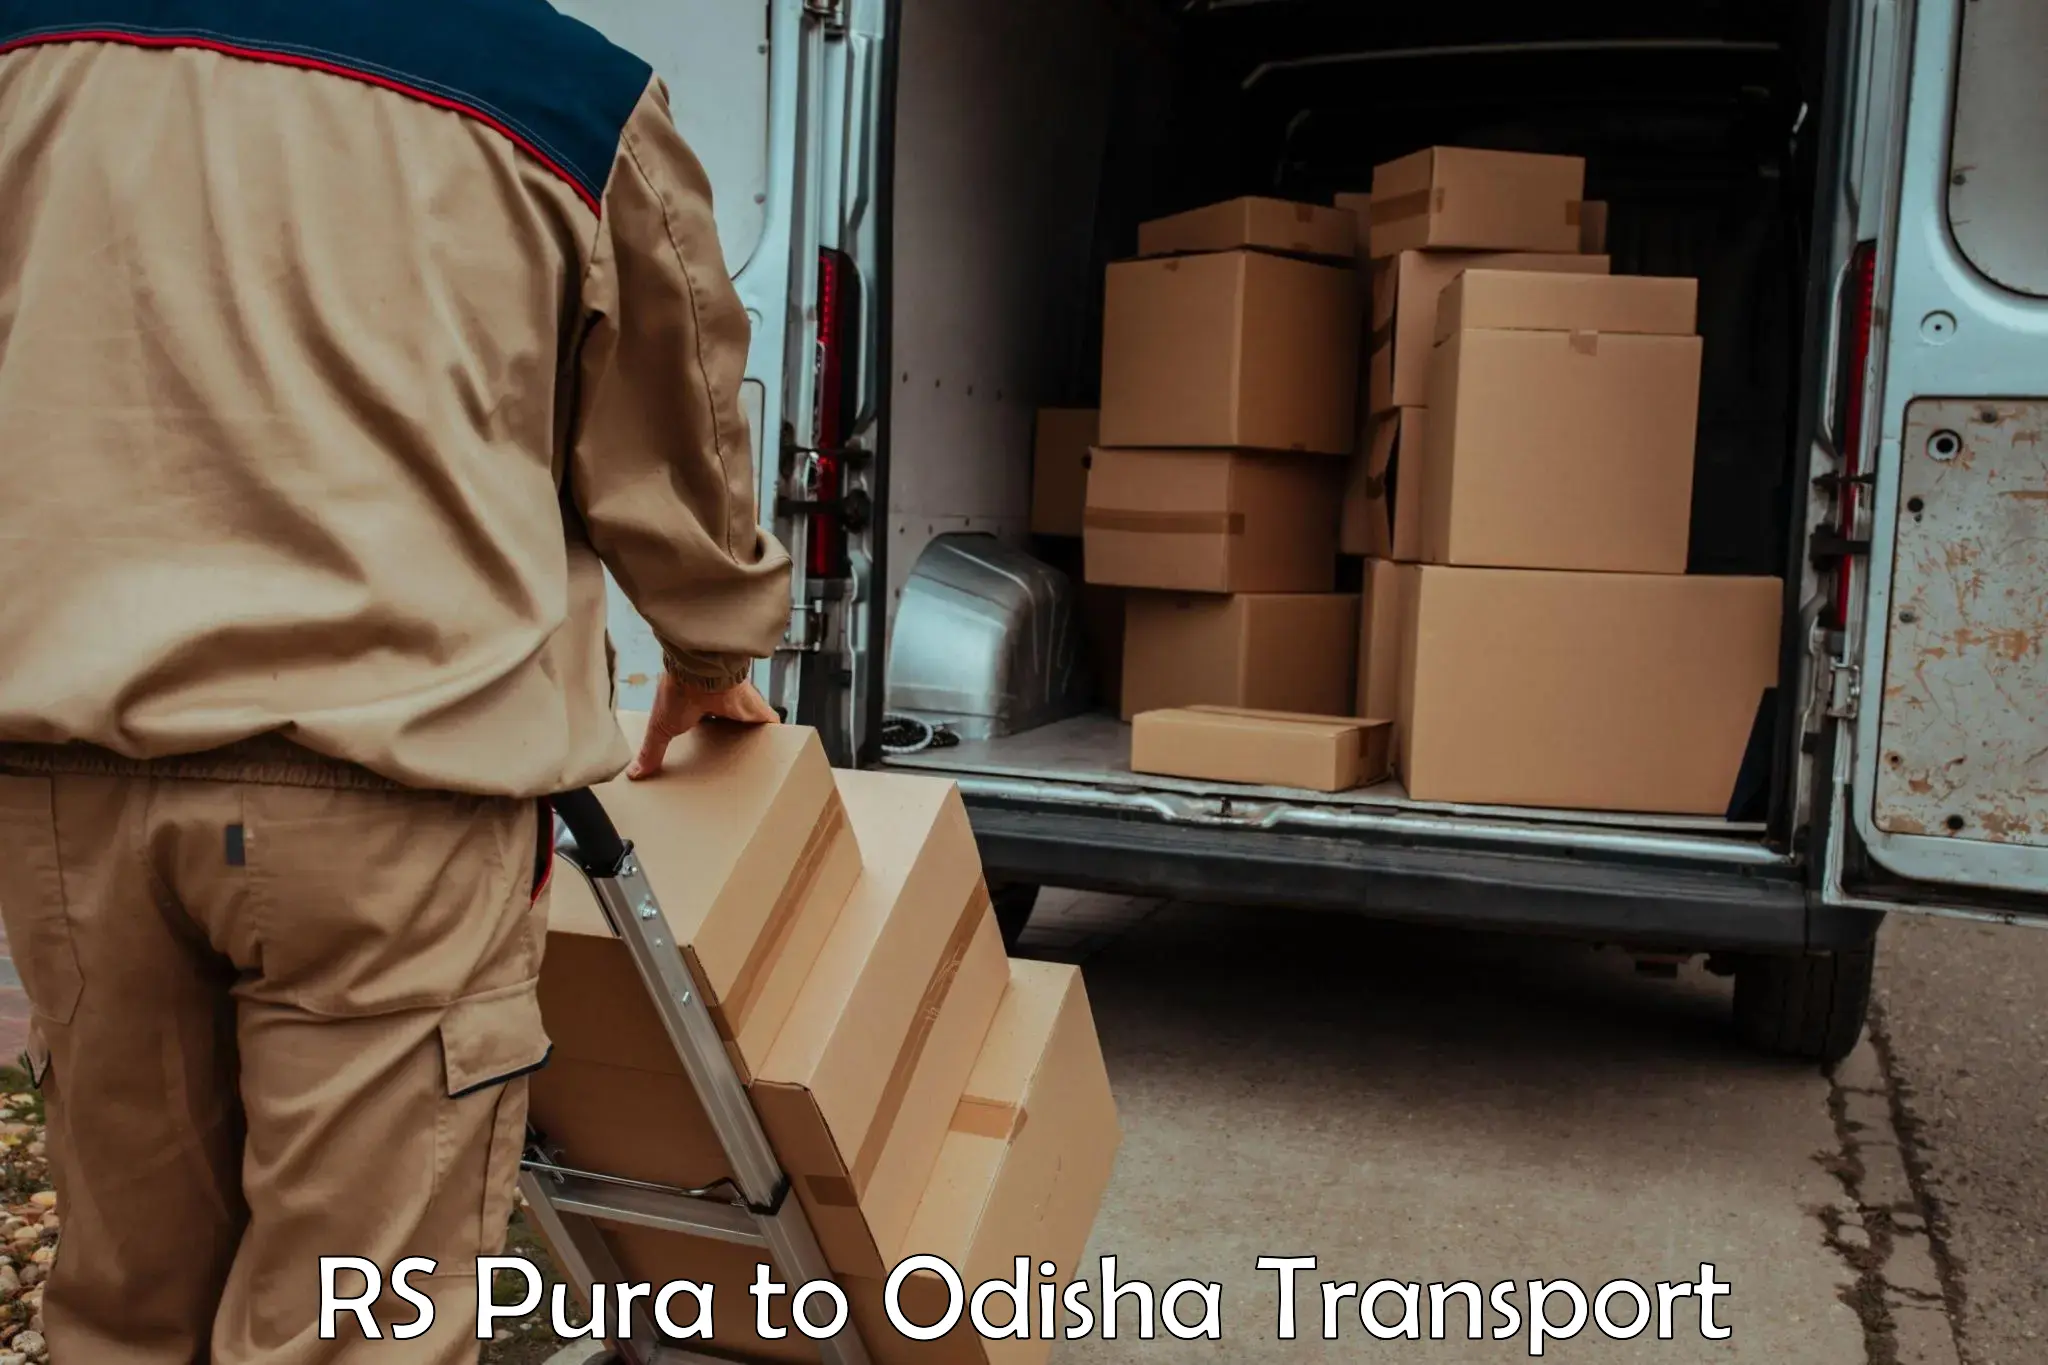 Vehicle transport services RS Pura to Paradip Port